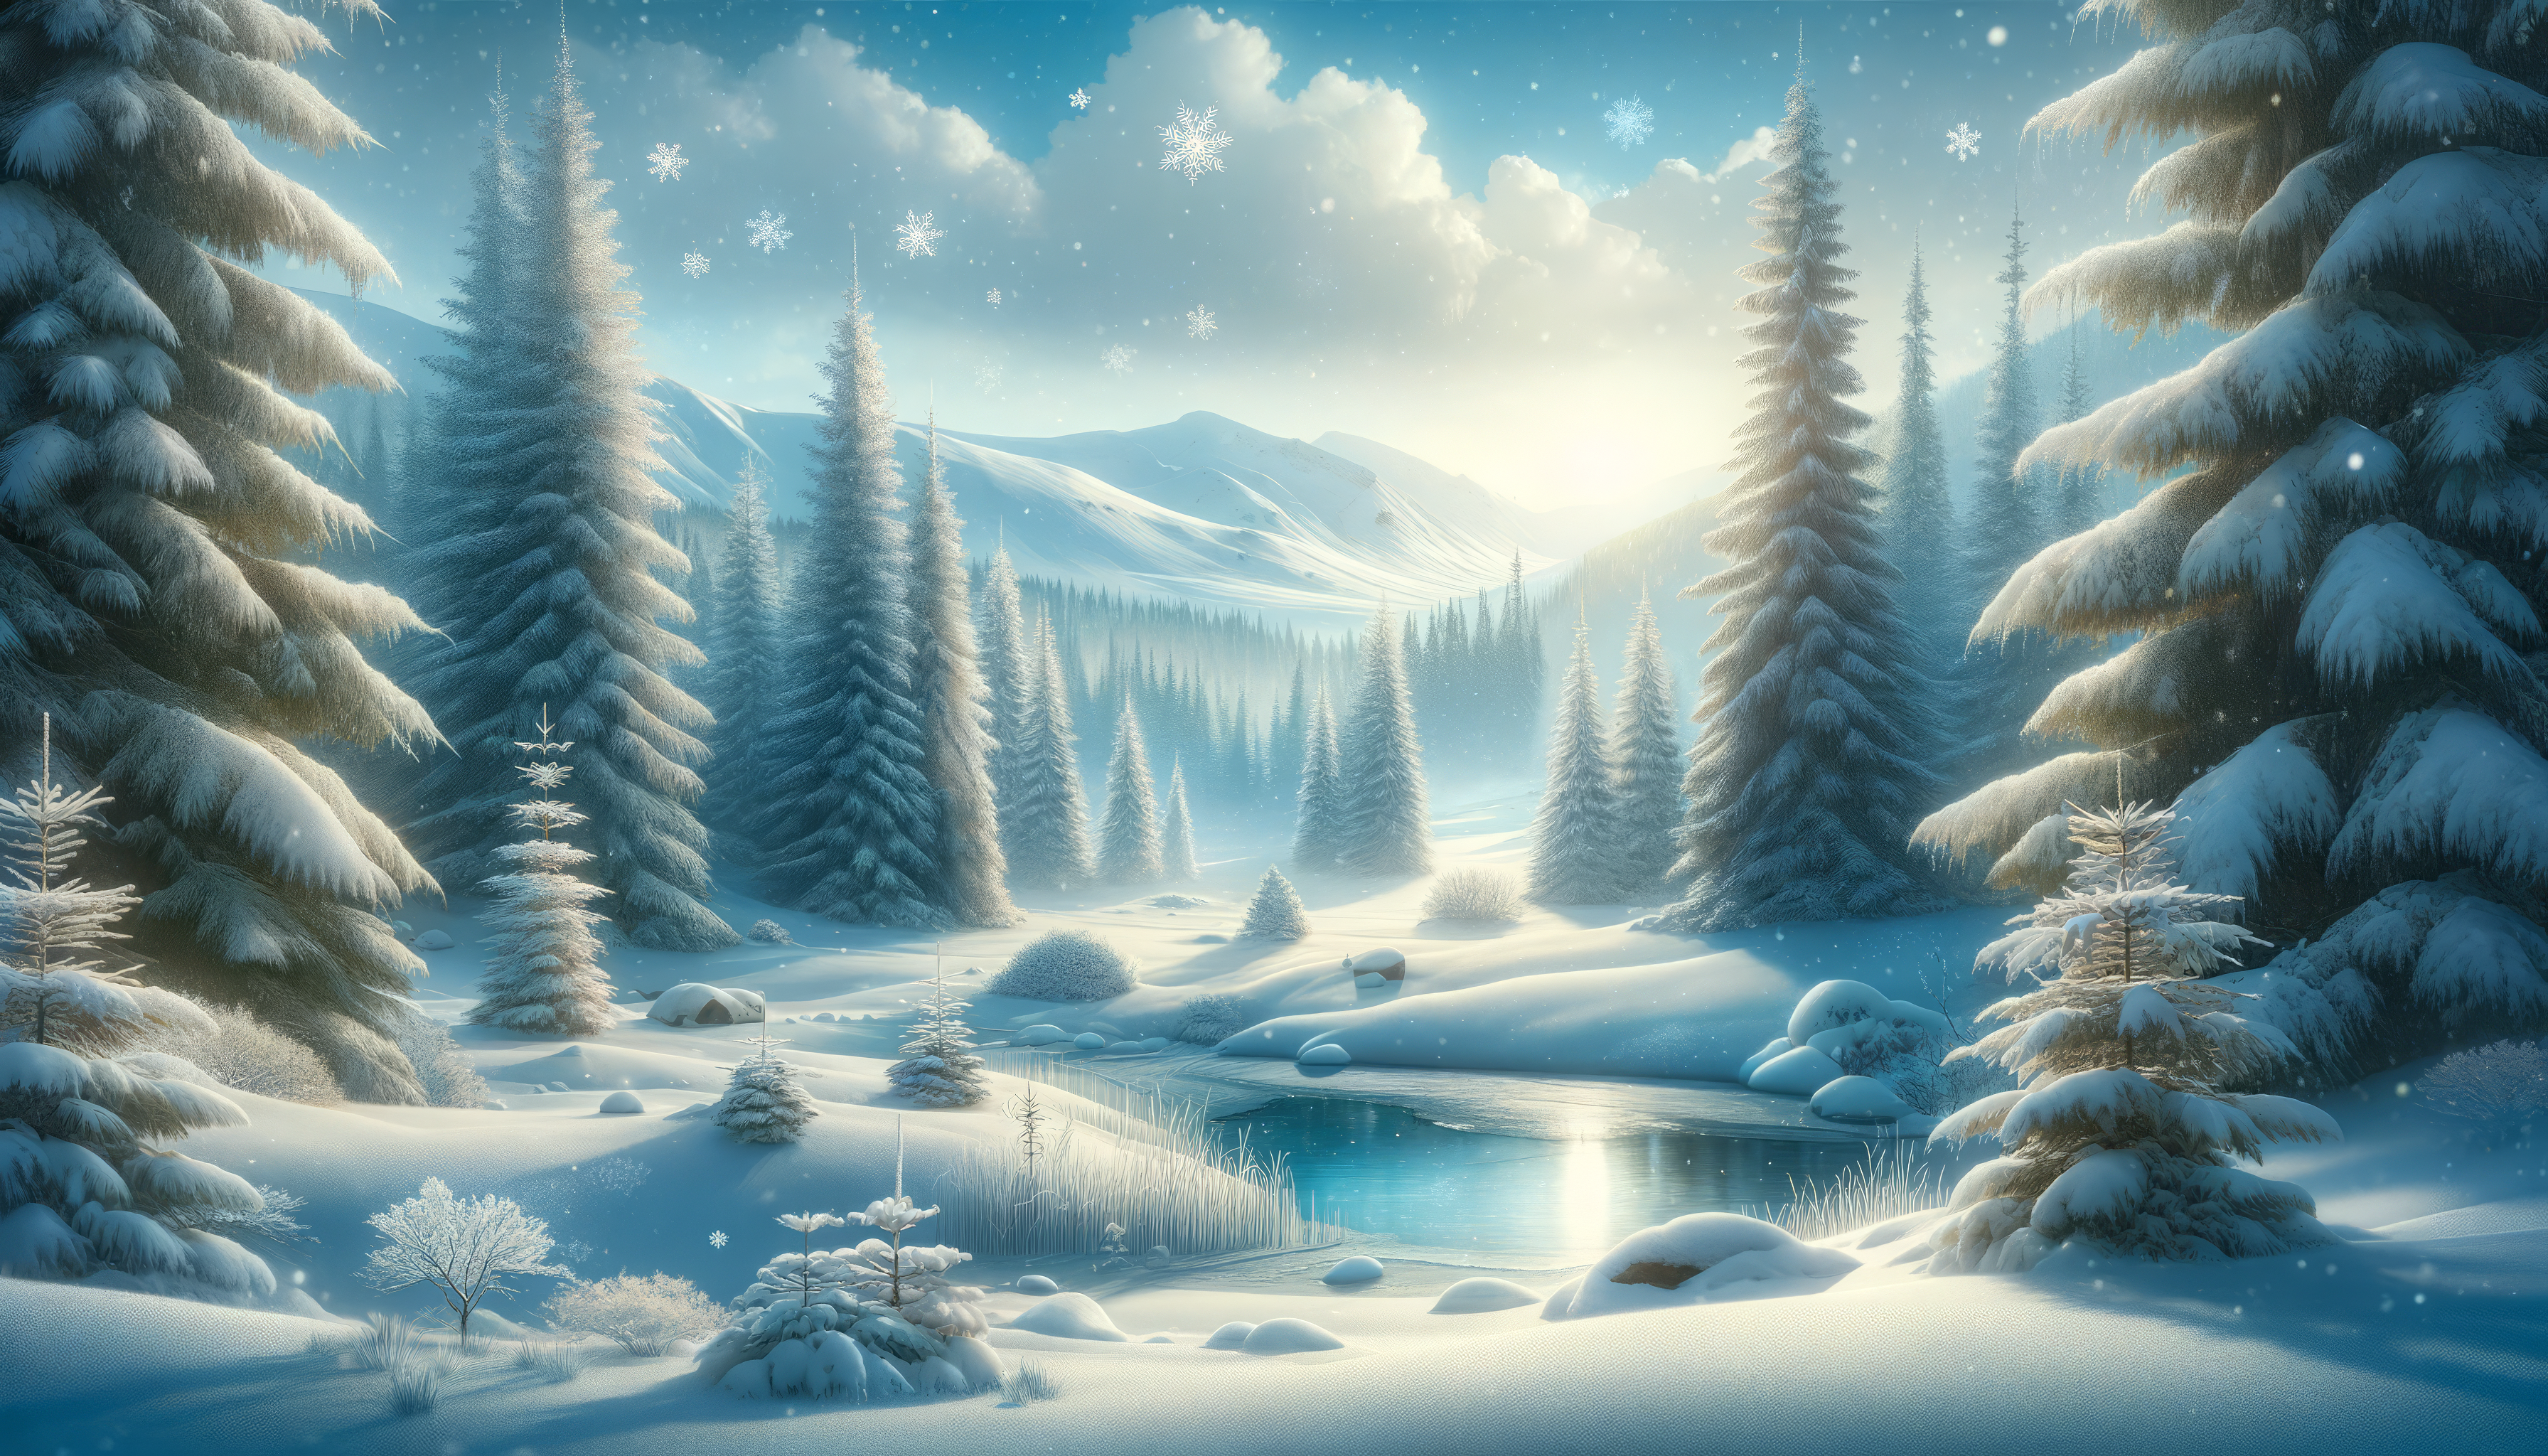 HD Winter Scene Desktop Wallpaper featuring a serene snowy landscape with pine trees and a small pond under a starry sky.